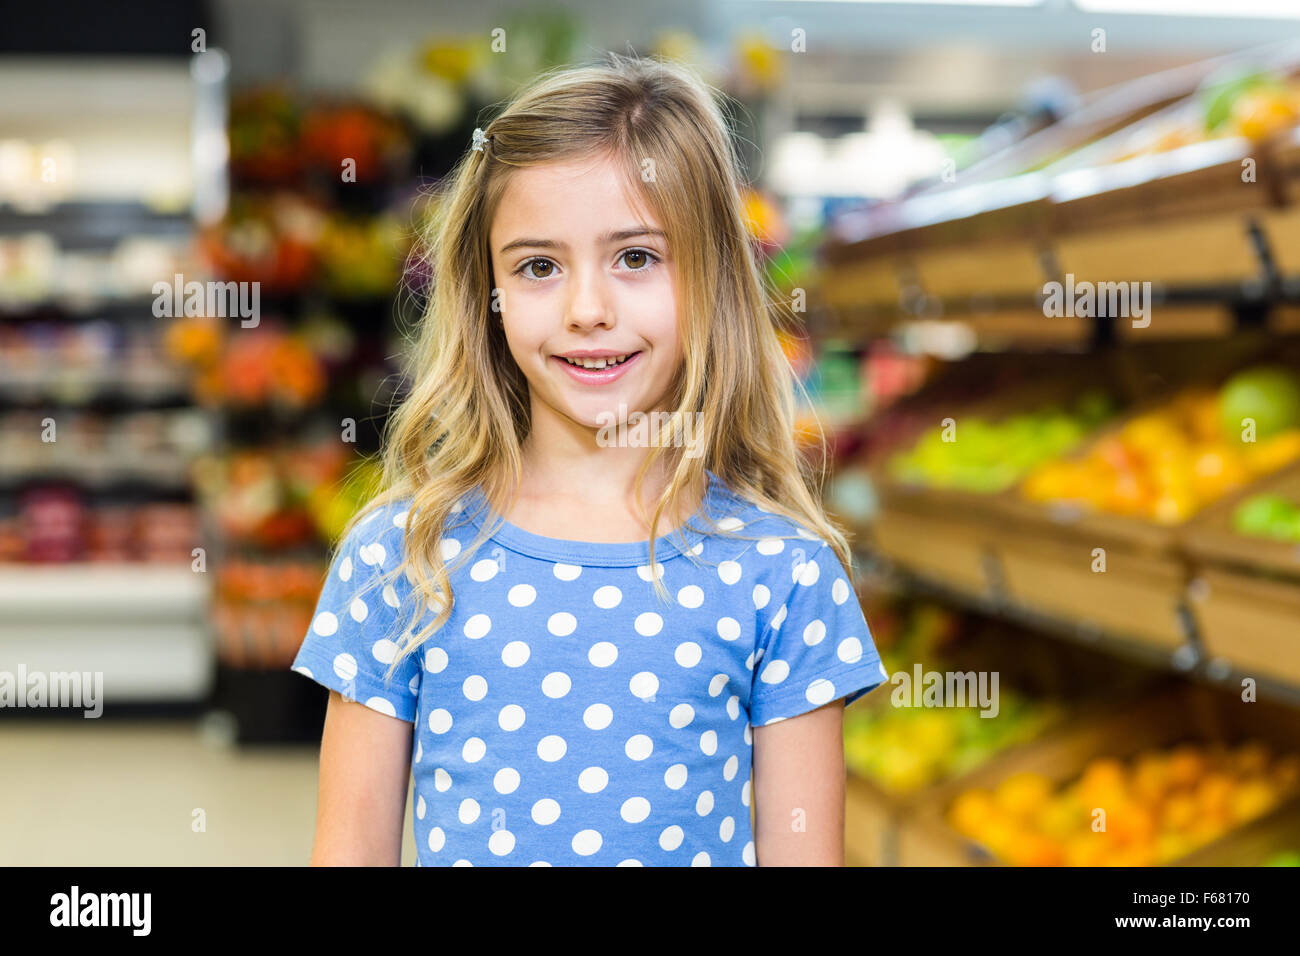 Smiling young girl looking at camera Banque D'Images